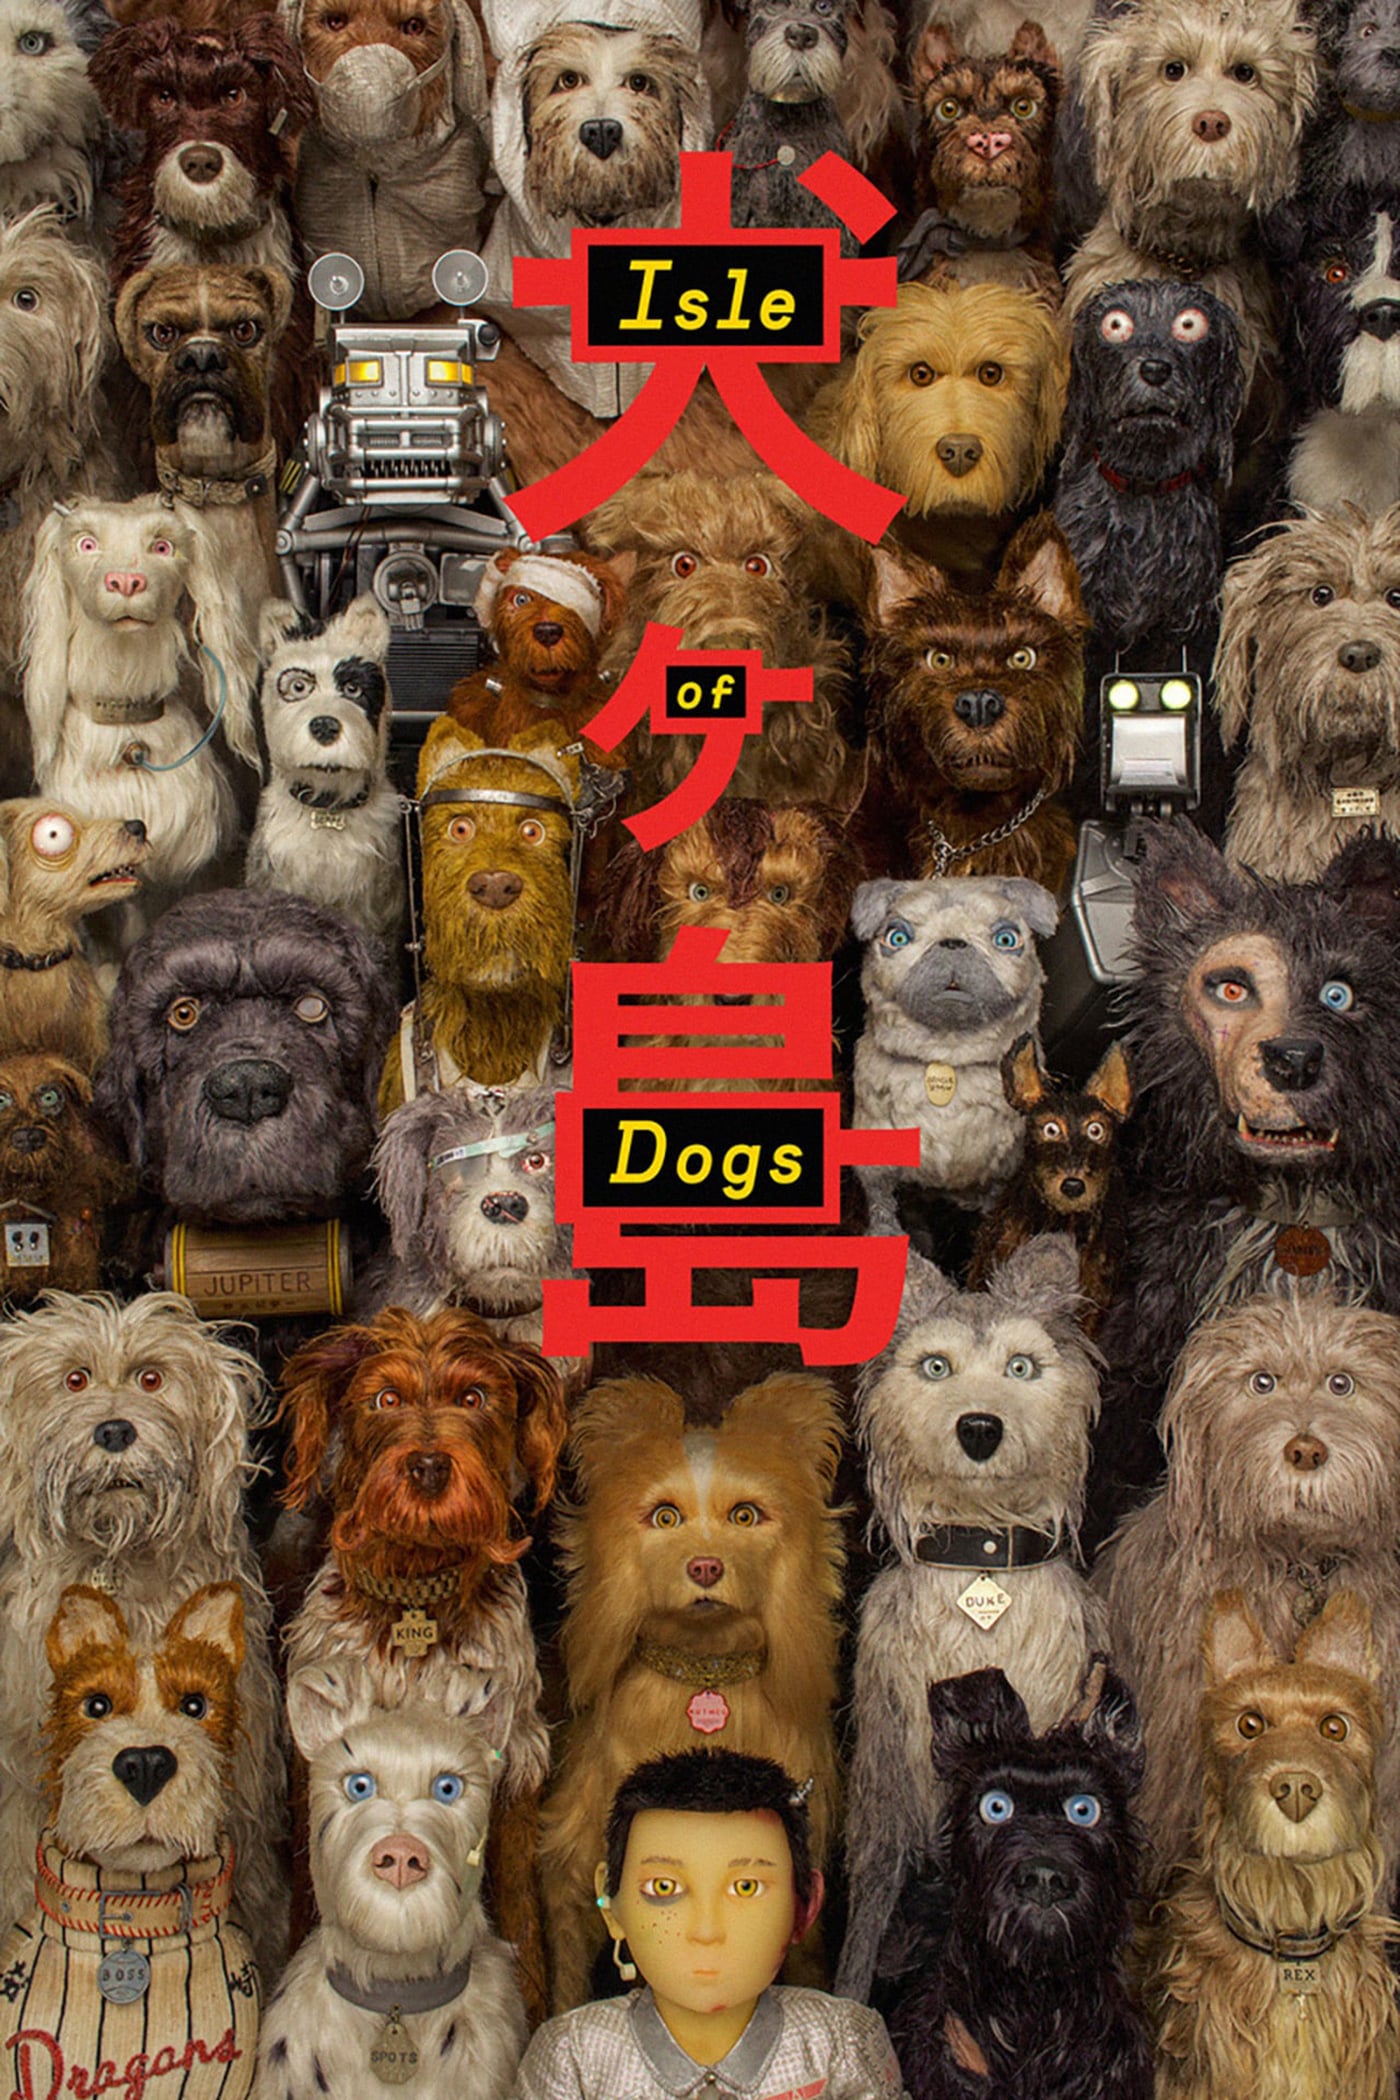 Poster for the movie "Isle of Dogs"